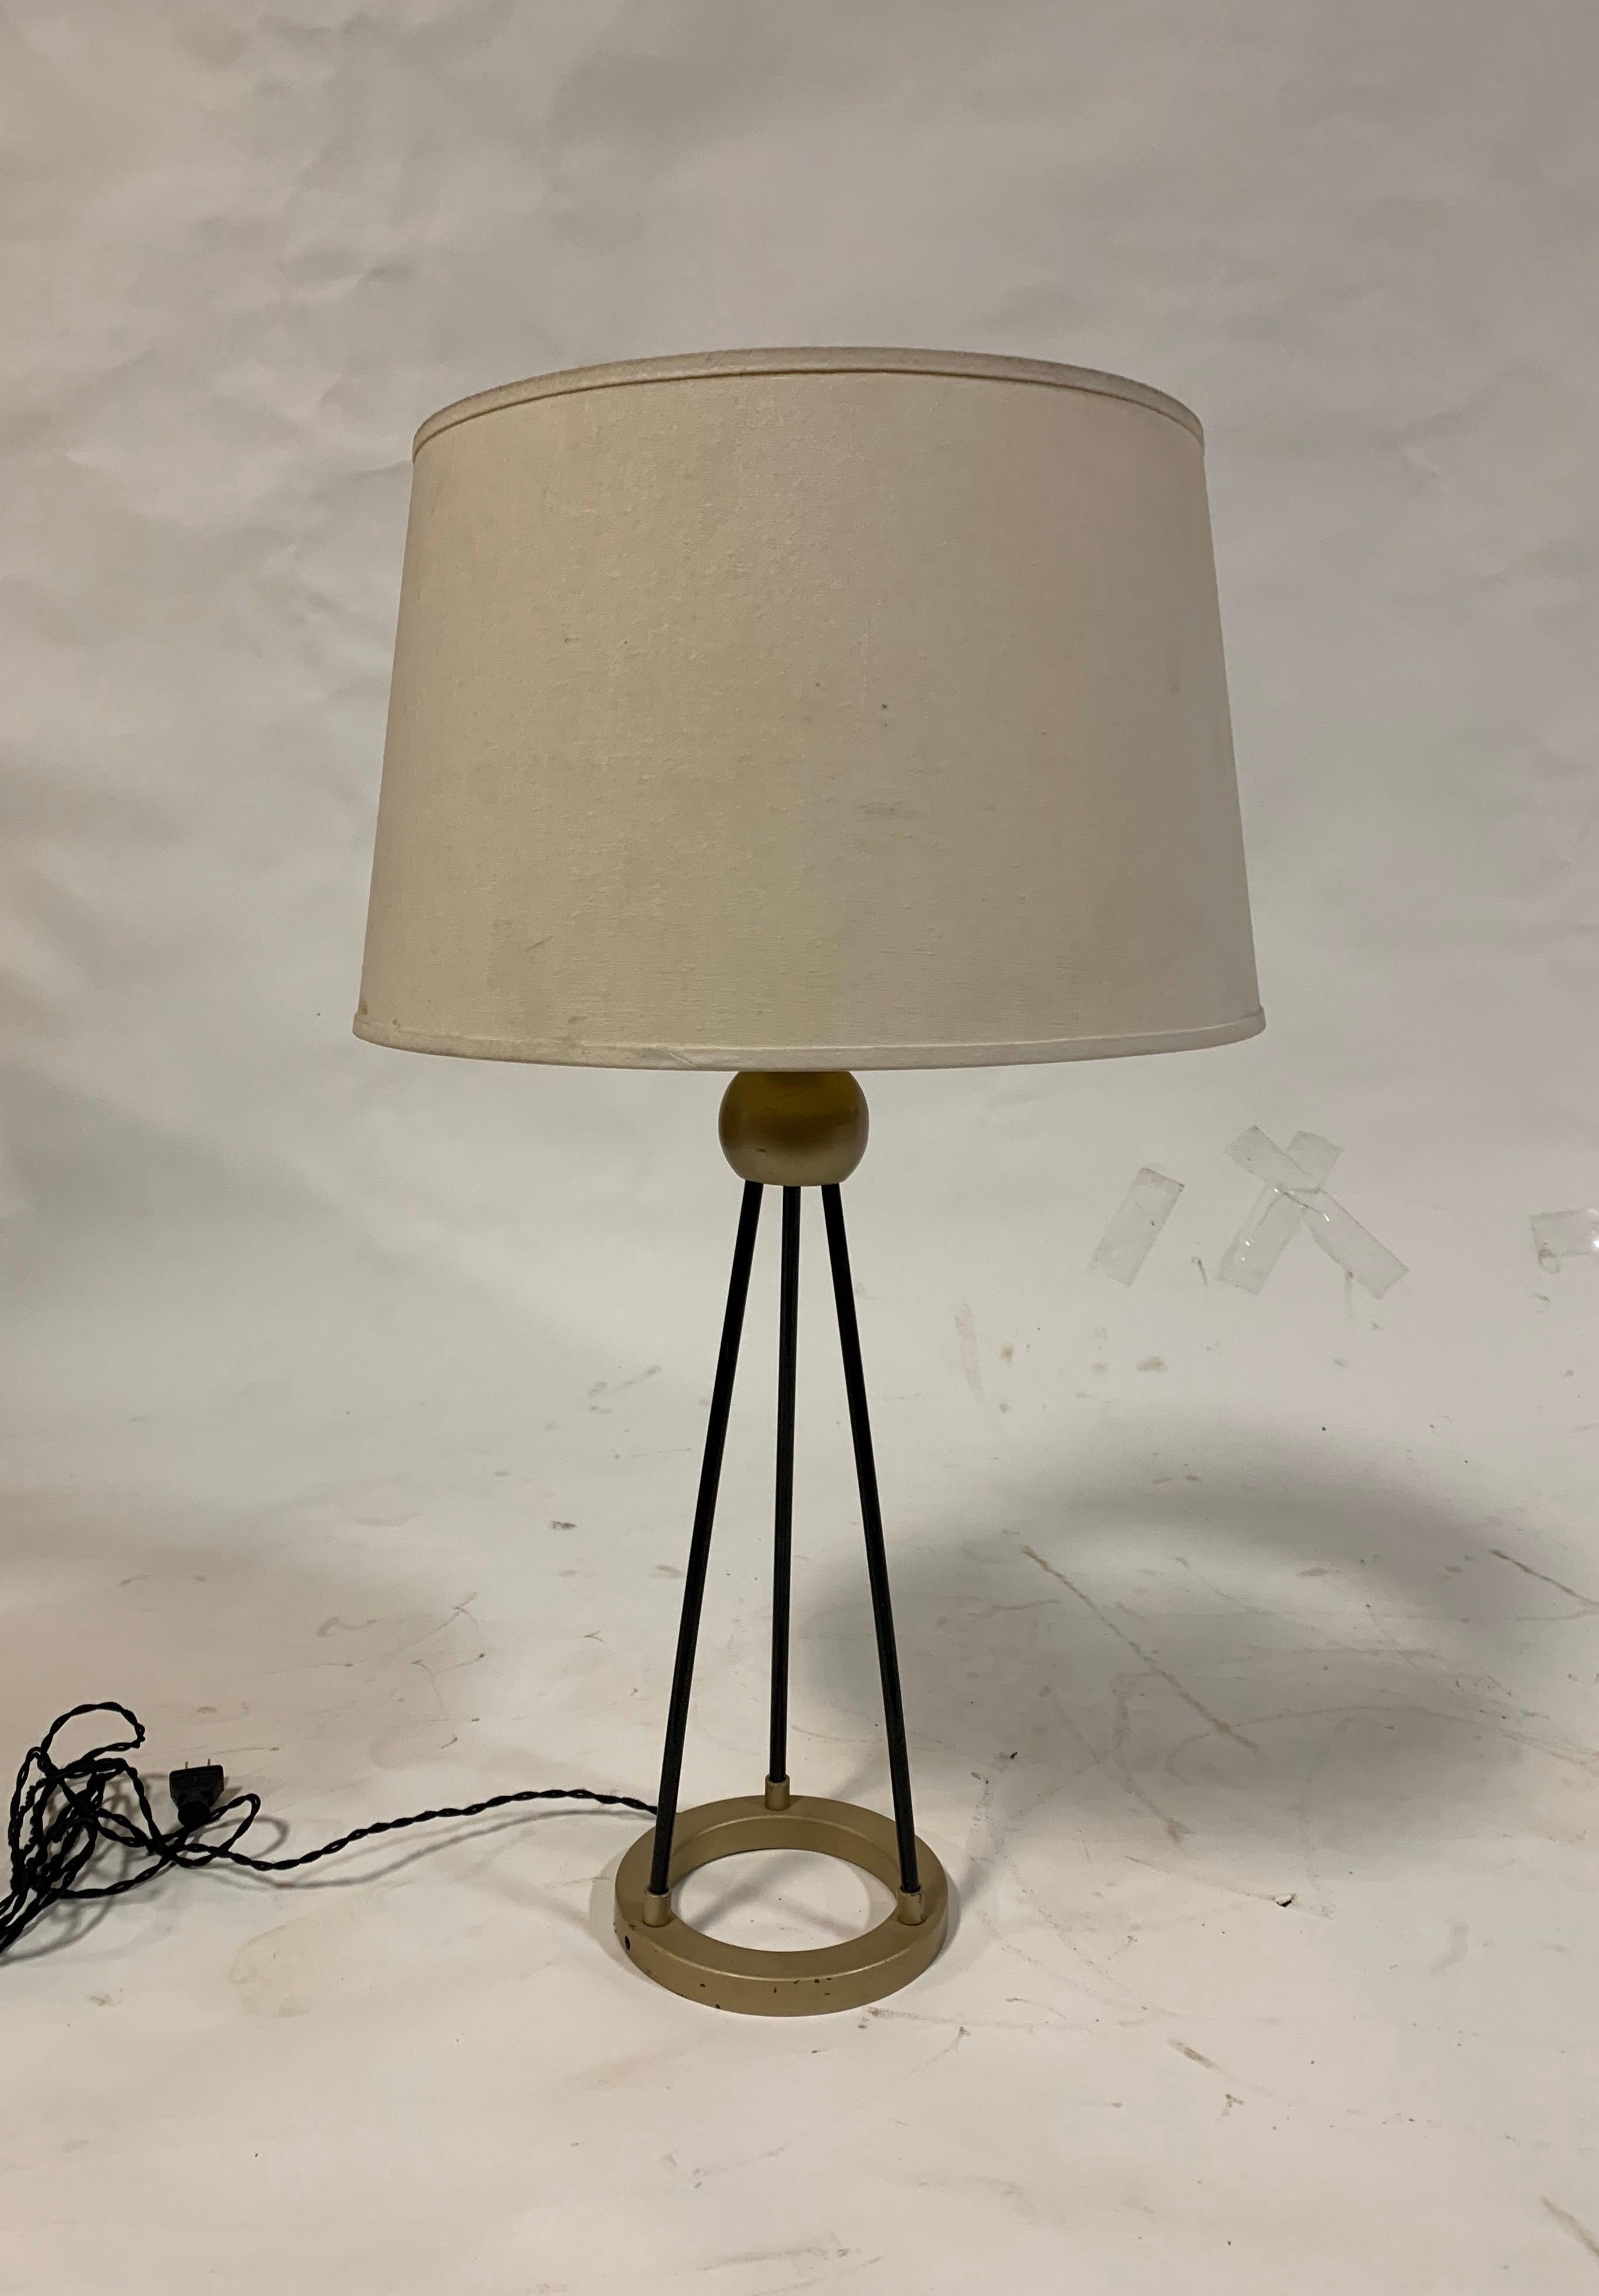 A brass and black metal table lamp; possibly by Walter Von Nessen. USA, circa 1940. Rewired with new sockets and French black silk twisted cord.

Takes one standard US bulb, 75 watts max.

Includes off white linen drum shade.

Dimensions:
Height